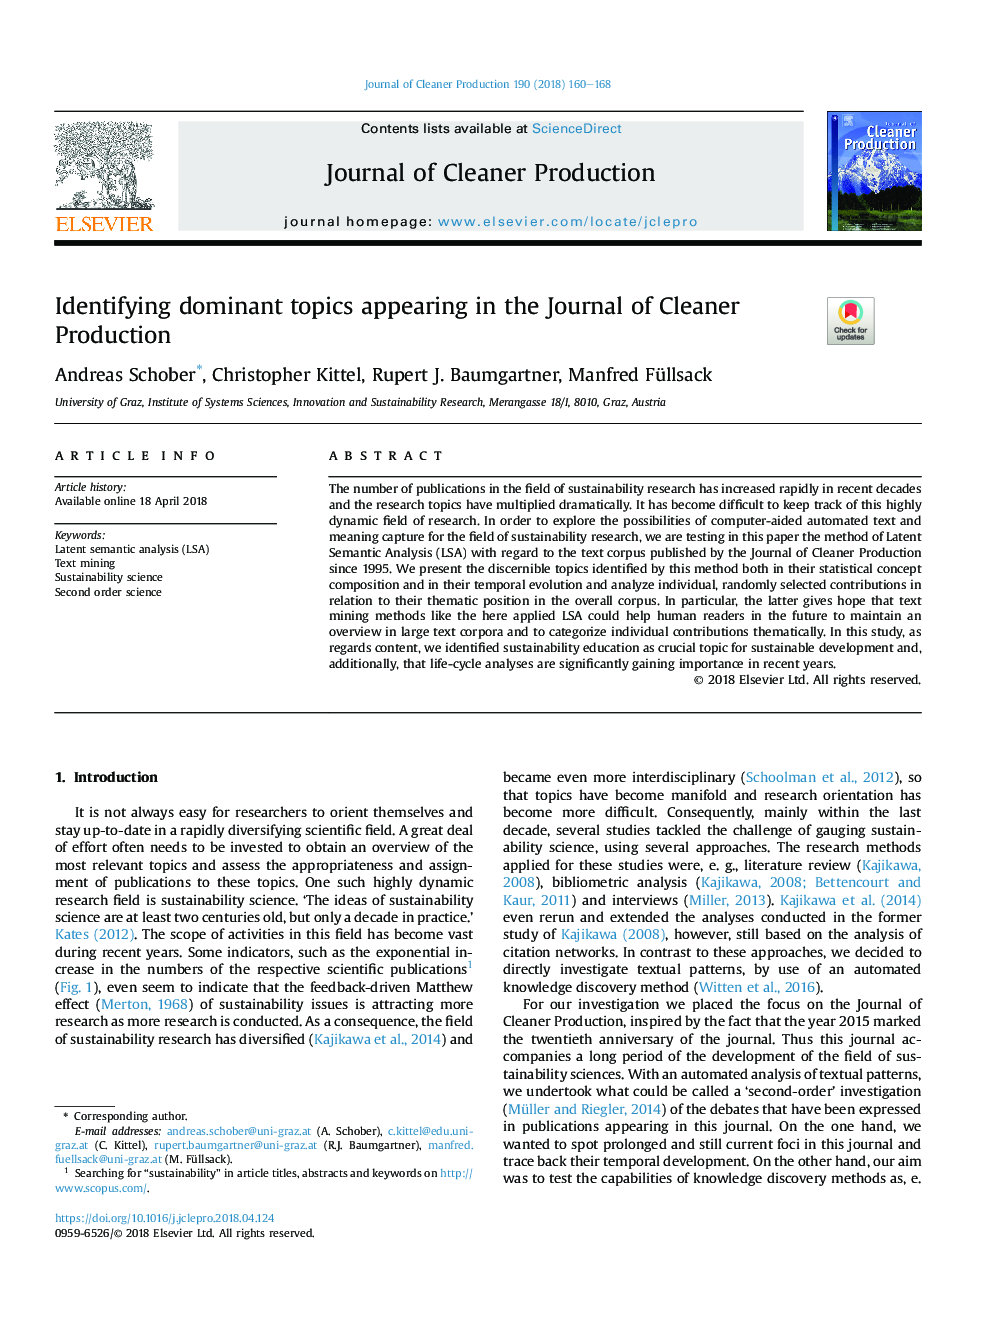 Identifying dominant topics appearing in the Journal of Cleaner Production